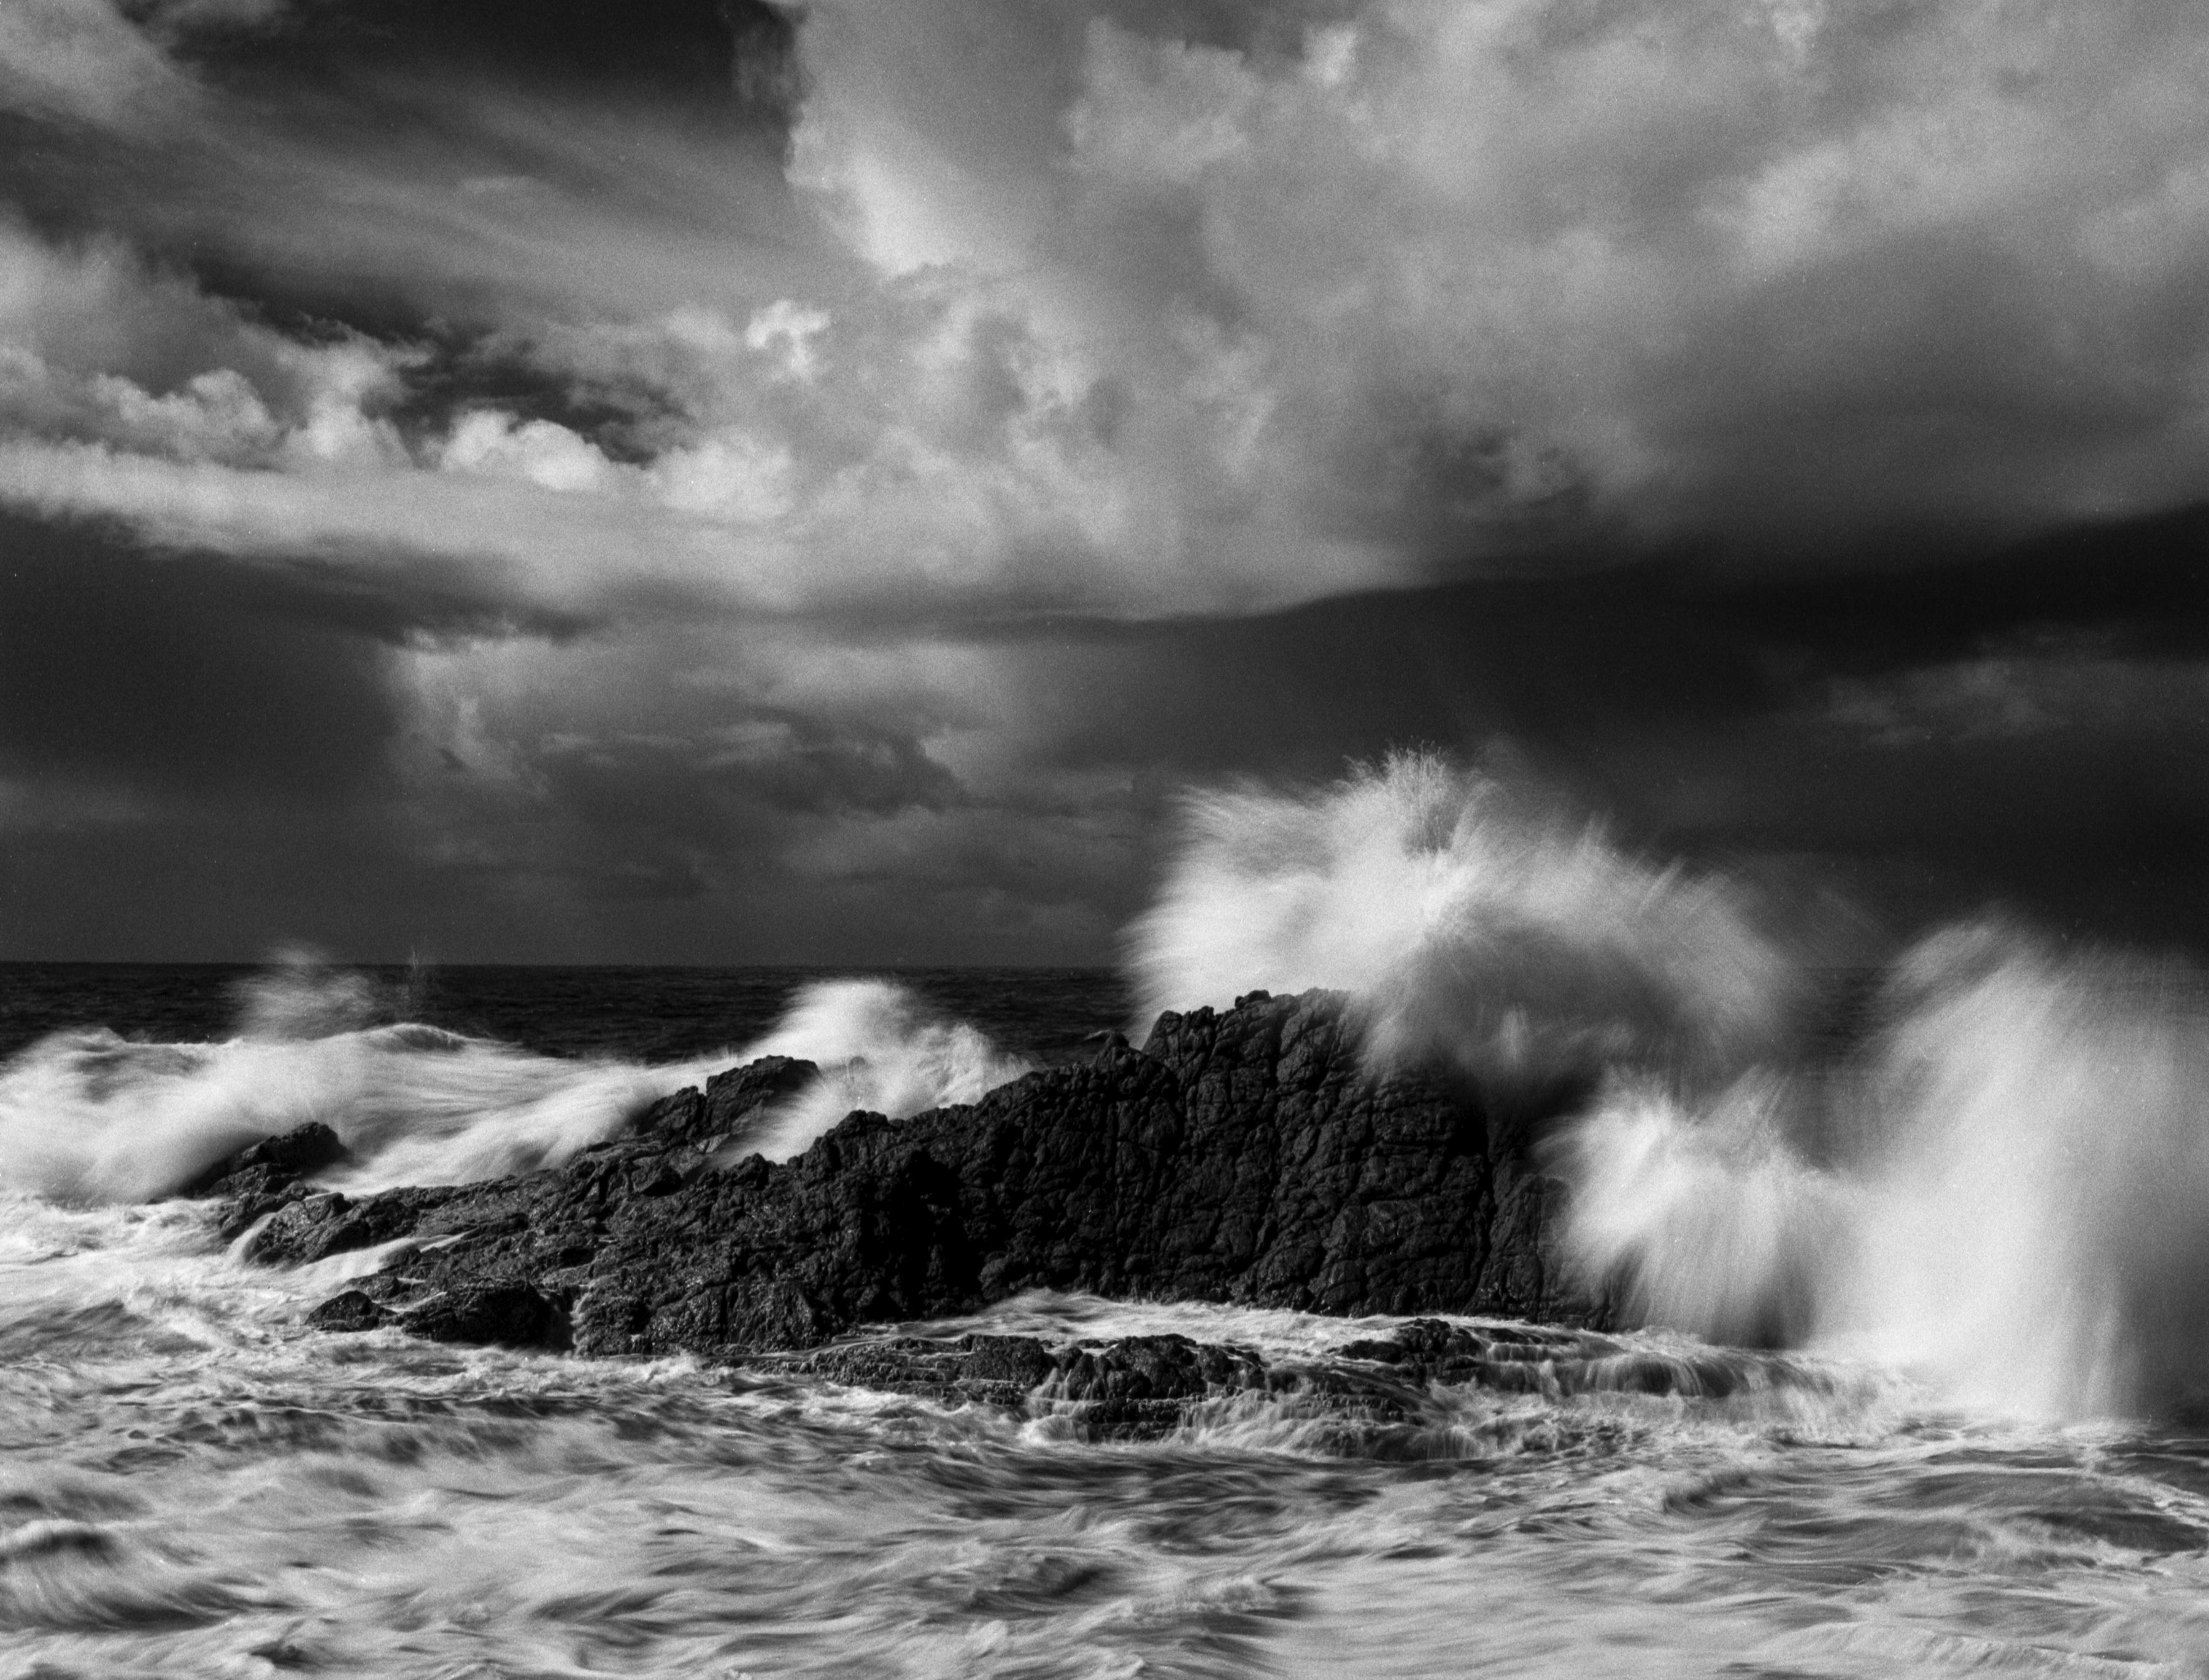 Rachell Hester Black and White Photograph - "The Wave" A Moody, Infrared Silver Gelatin Photograph of a Crashing Wave